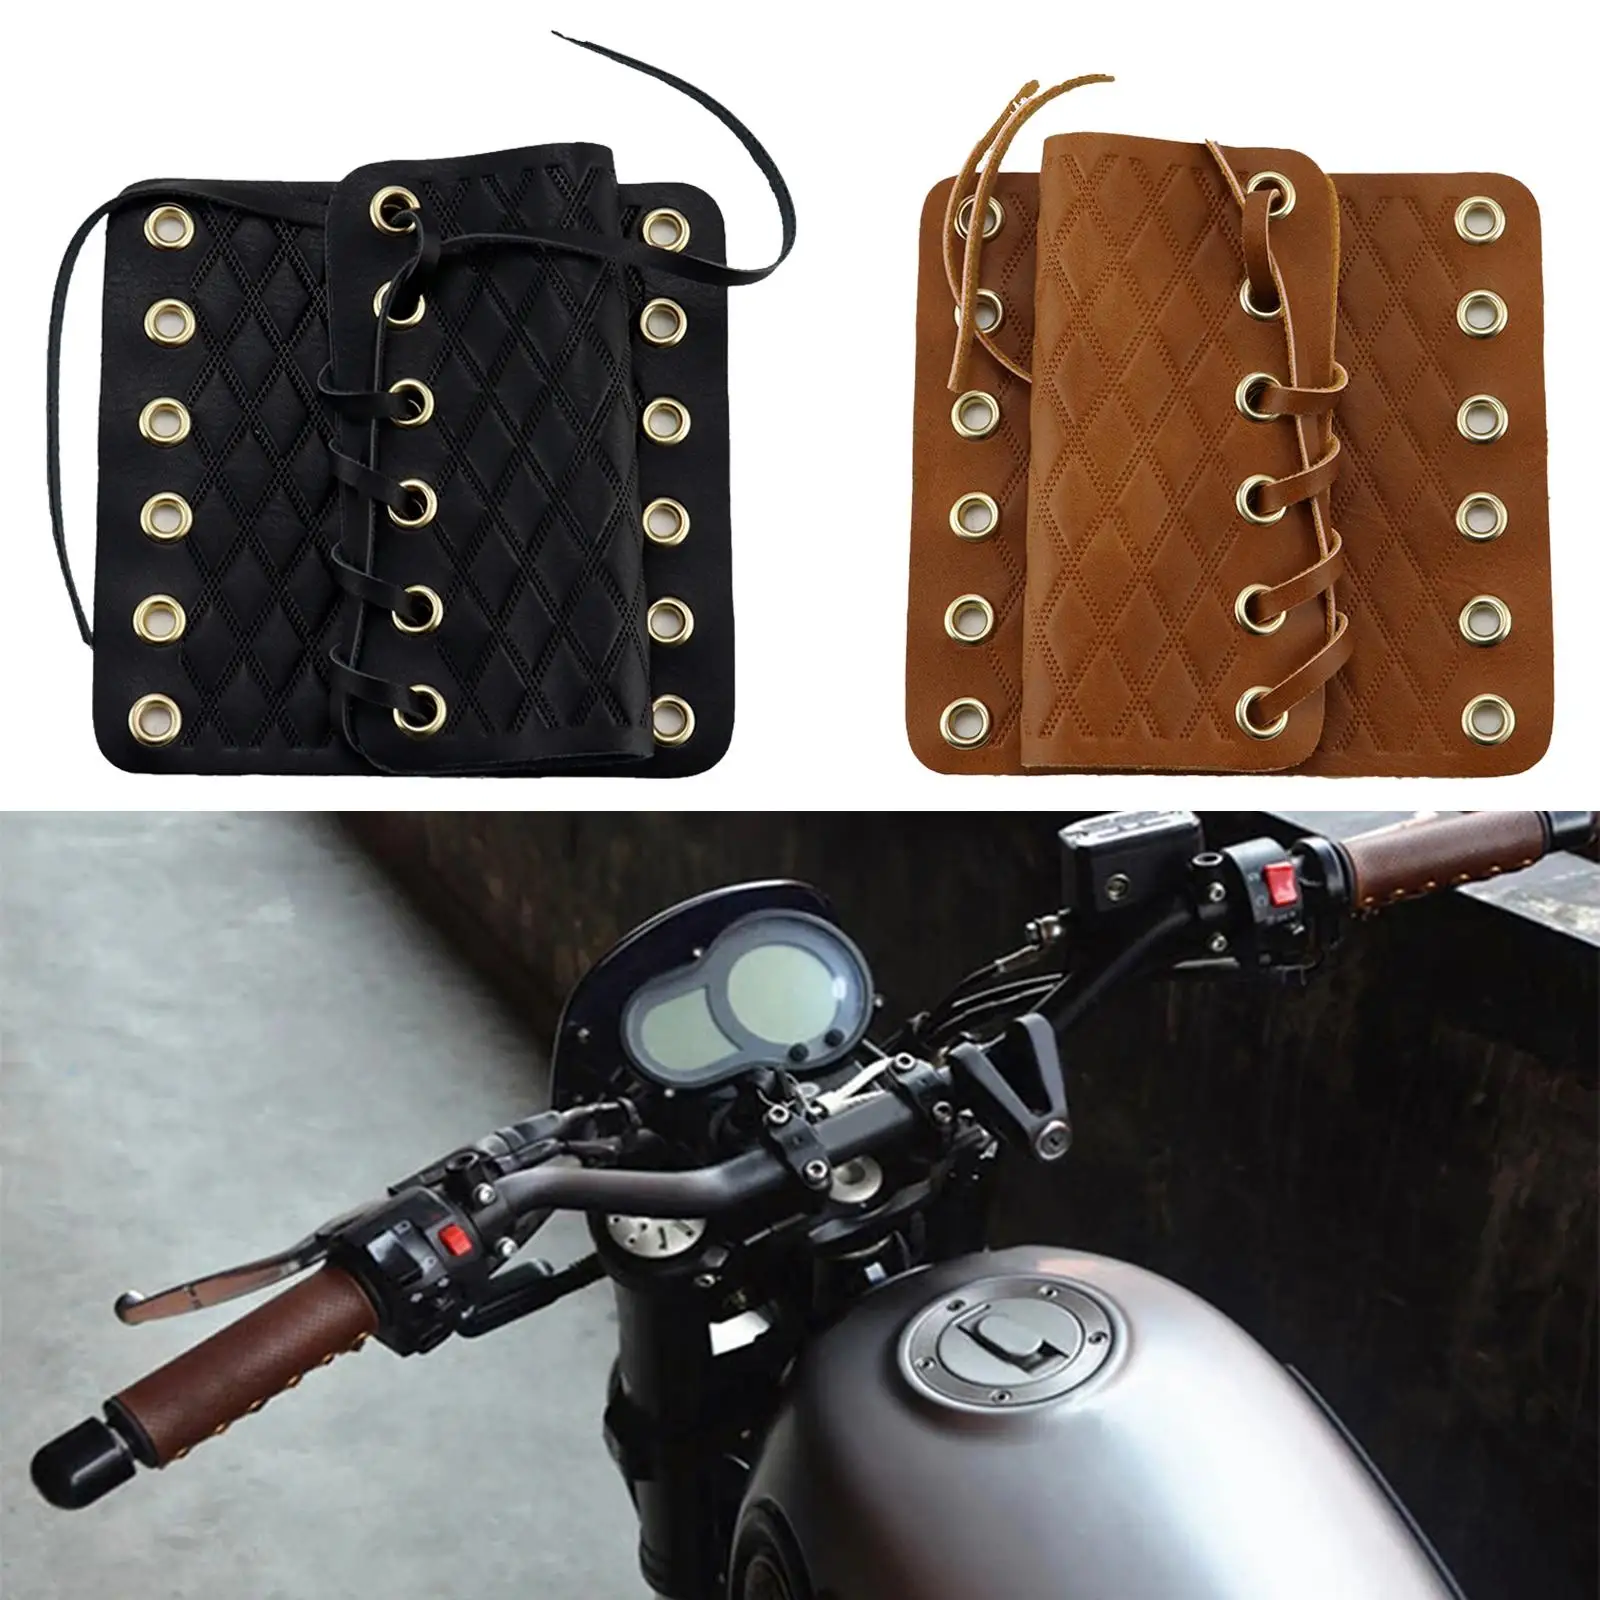 Universal Motorcycle Hand Grips Cover Shock Absorb Throttle Grip Covers Adjustable Straps for Most Motorbikes All Handgrips